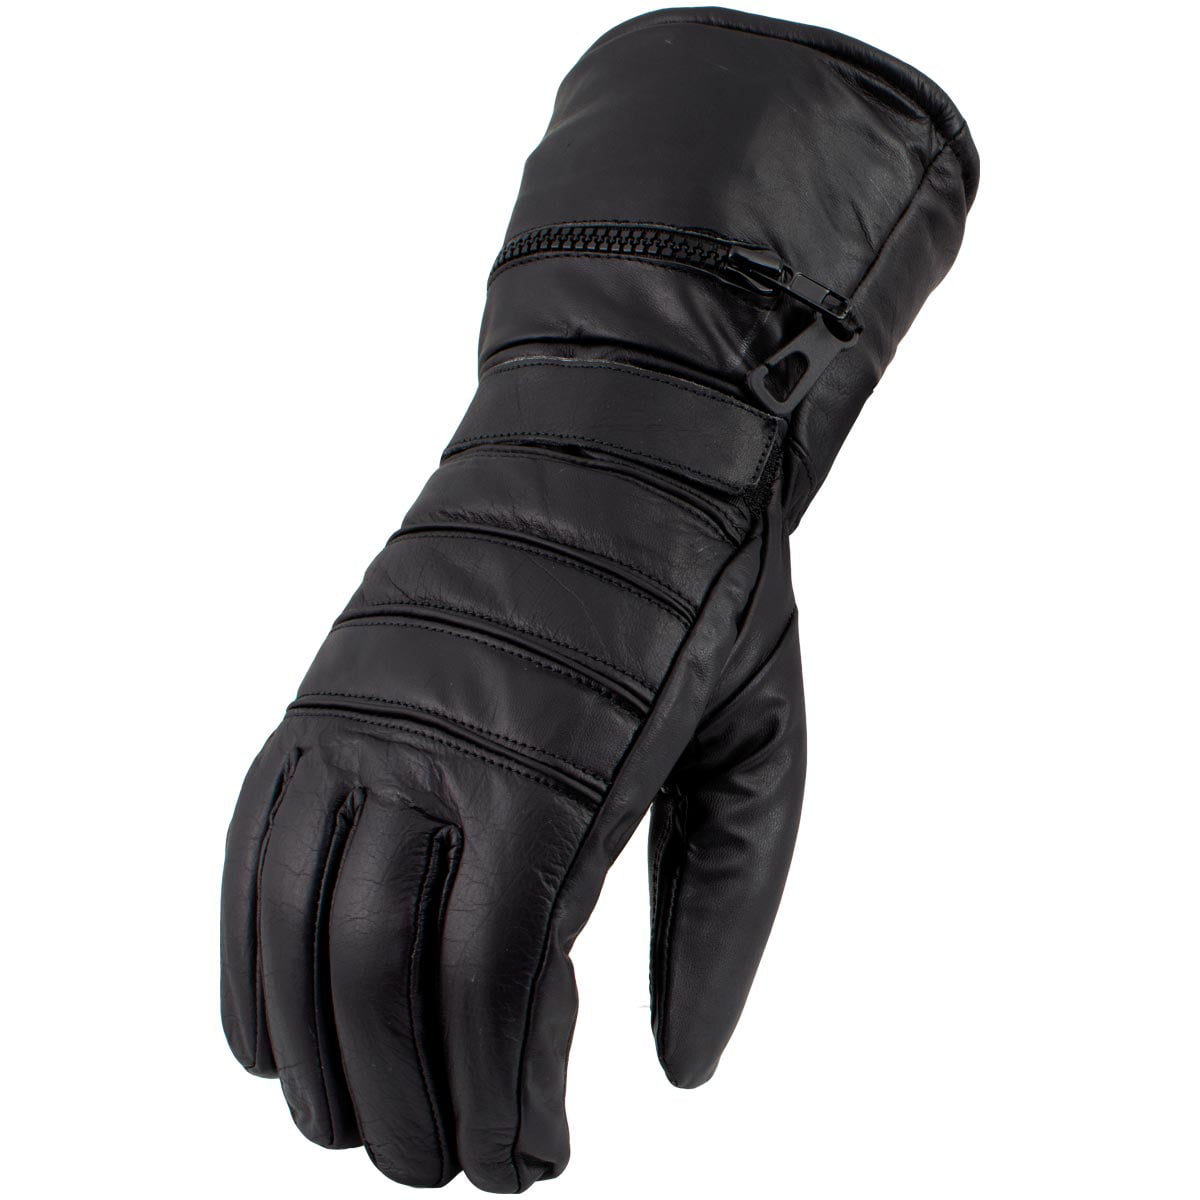 Men's Winter/Motorcycle Cruiser ATV Genuine Leather Thinsulated Gloves Gauntlets